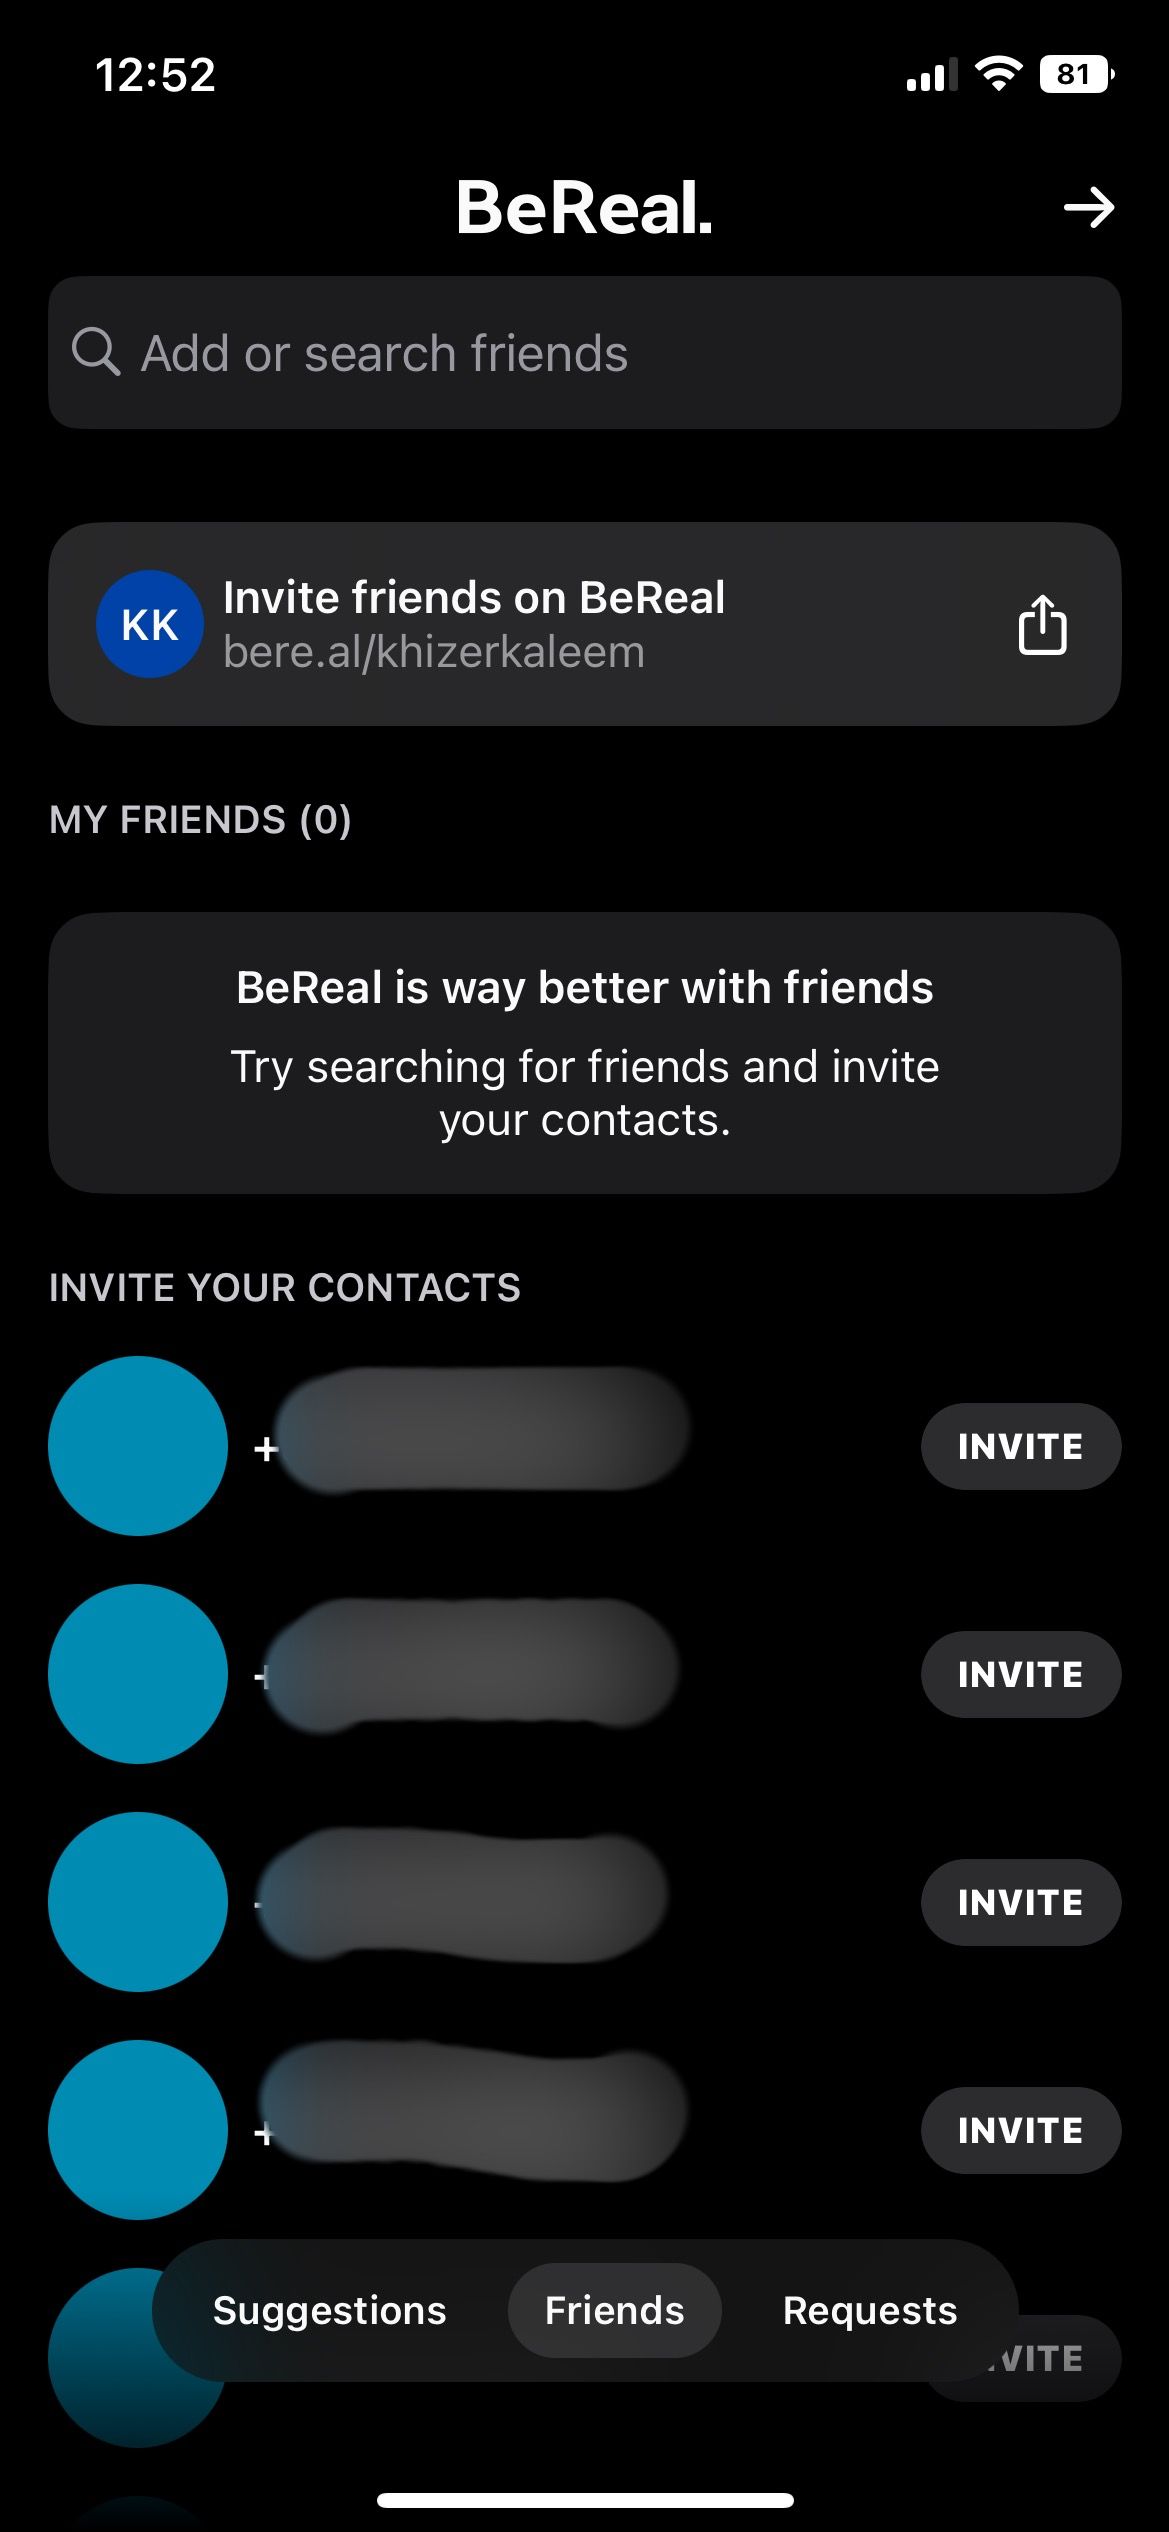 Invite your contacts on BeReal